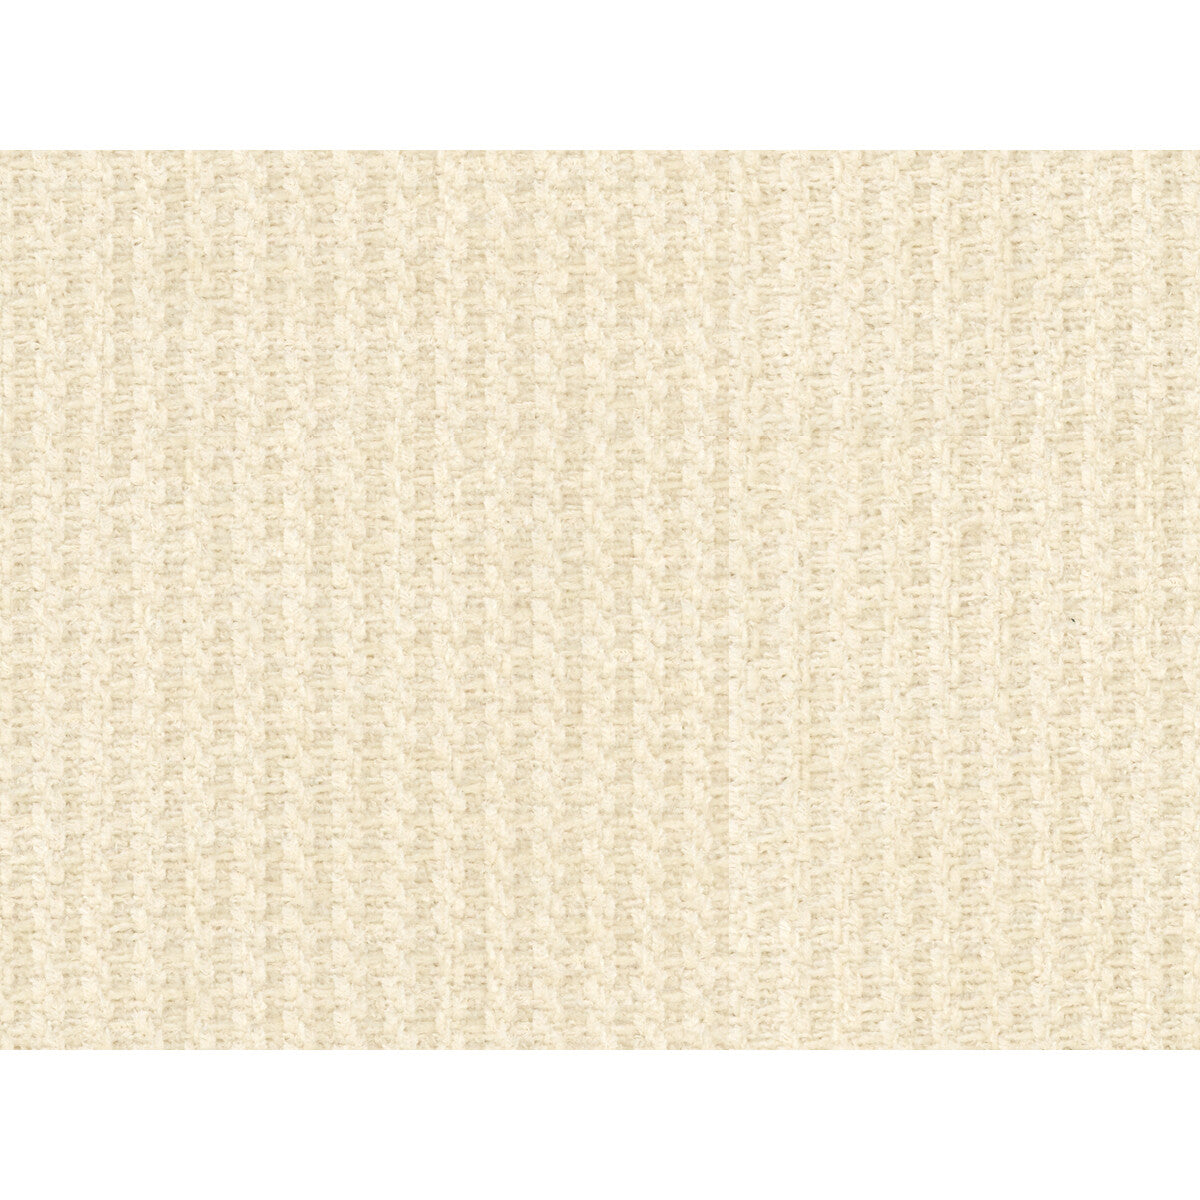 Granier Chenille fabric in white color - pattern 8016105.1.0 - by Brunschwig &amp; Fils in the Chambery Textures collection